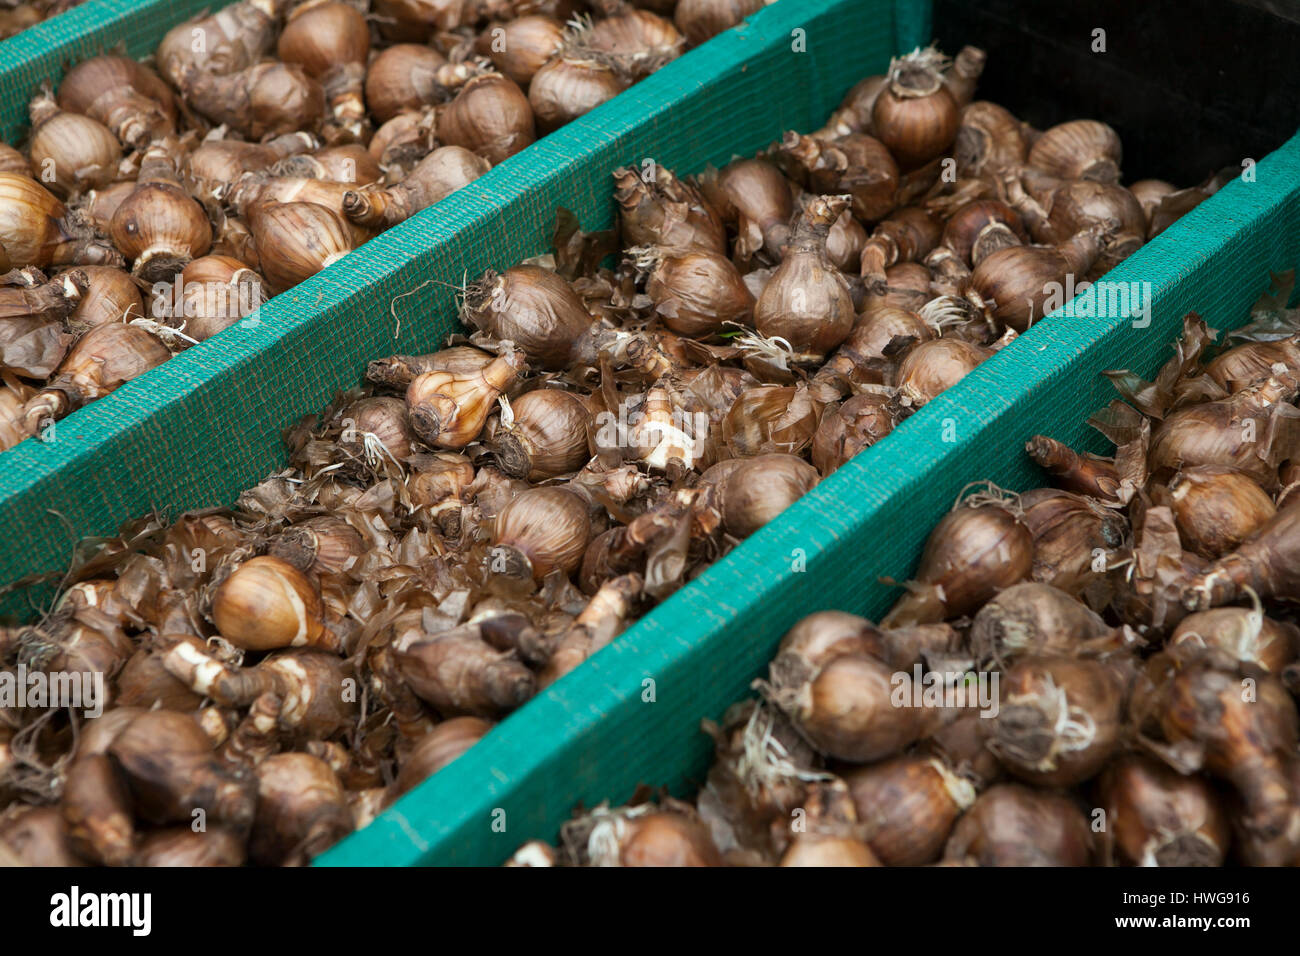 Hundreds of varieties of bulbs for sale at Amsterdam's floating flower market Stock Photo